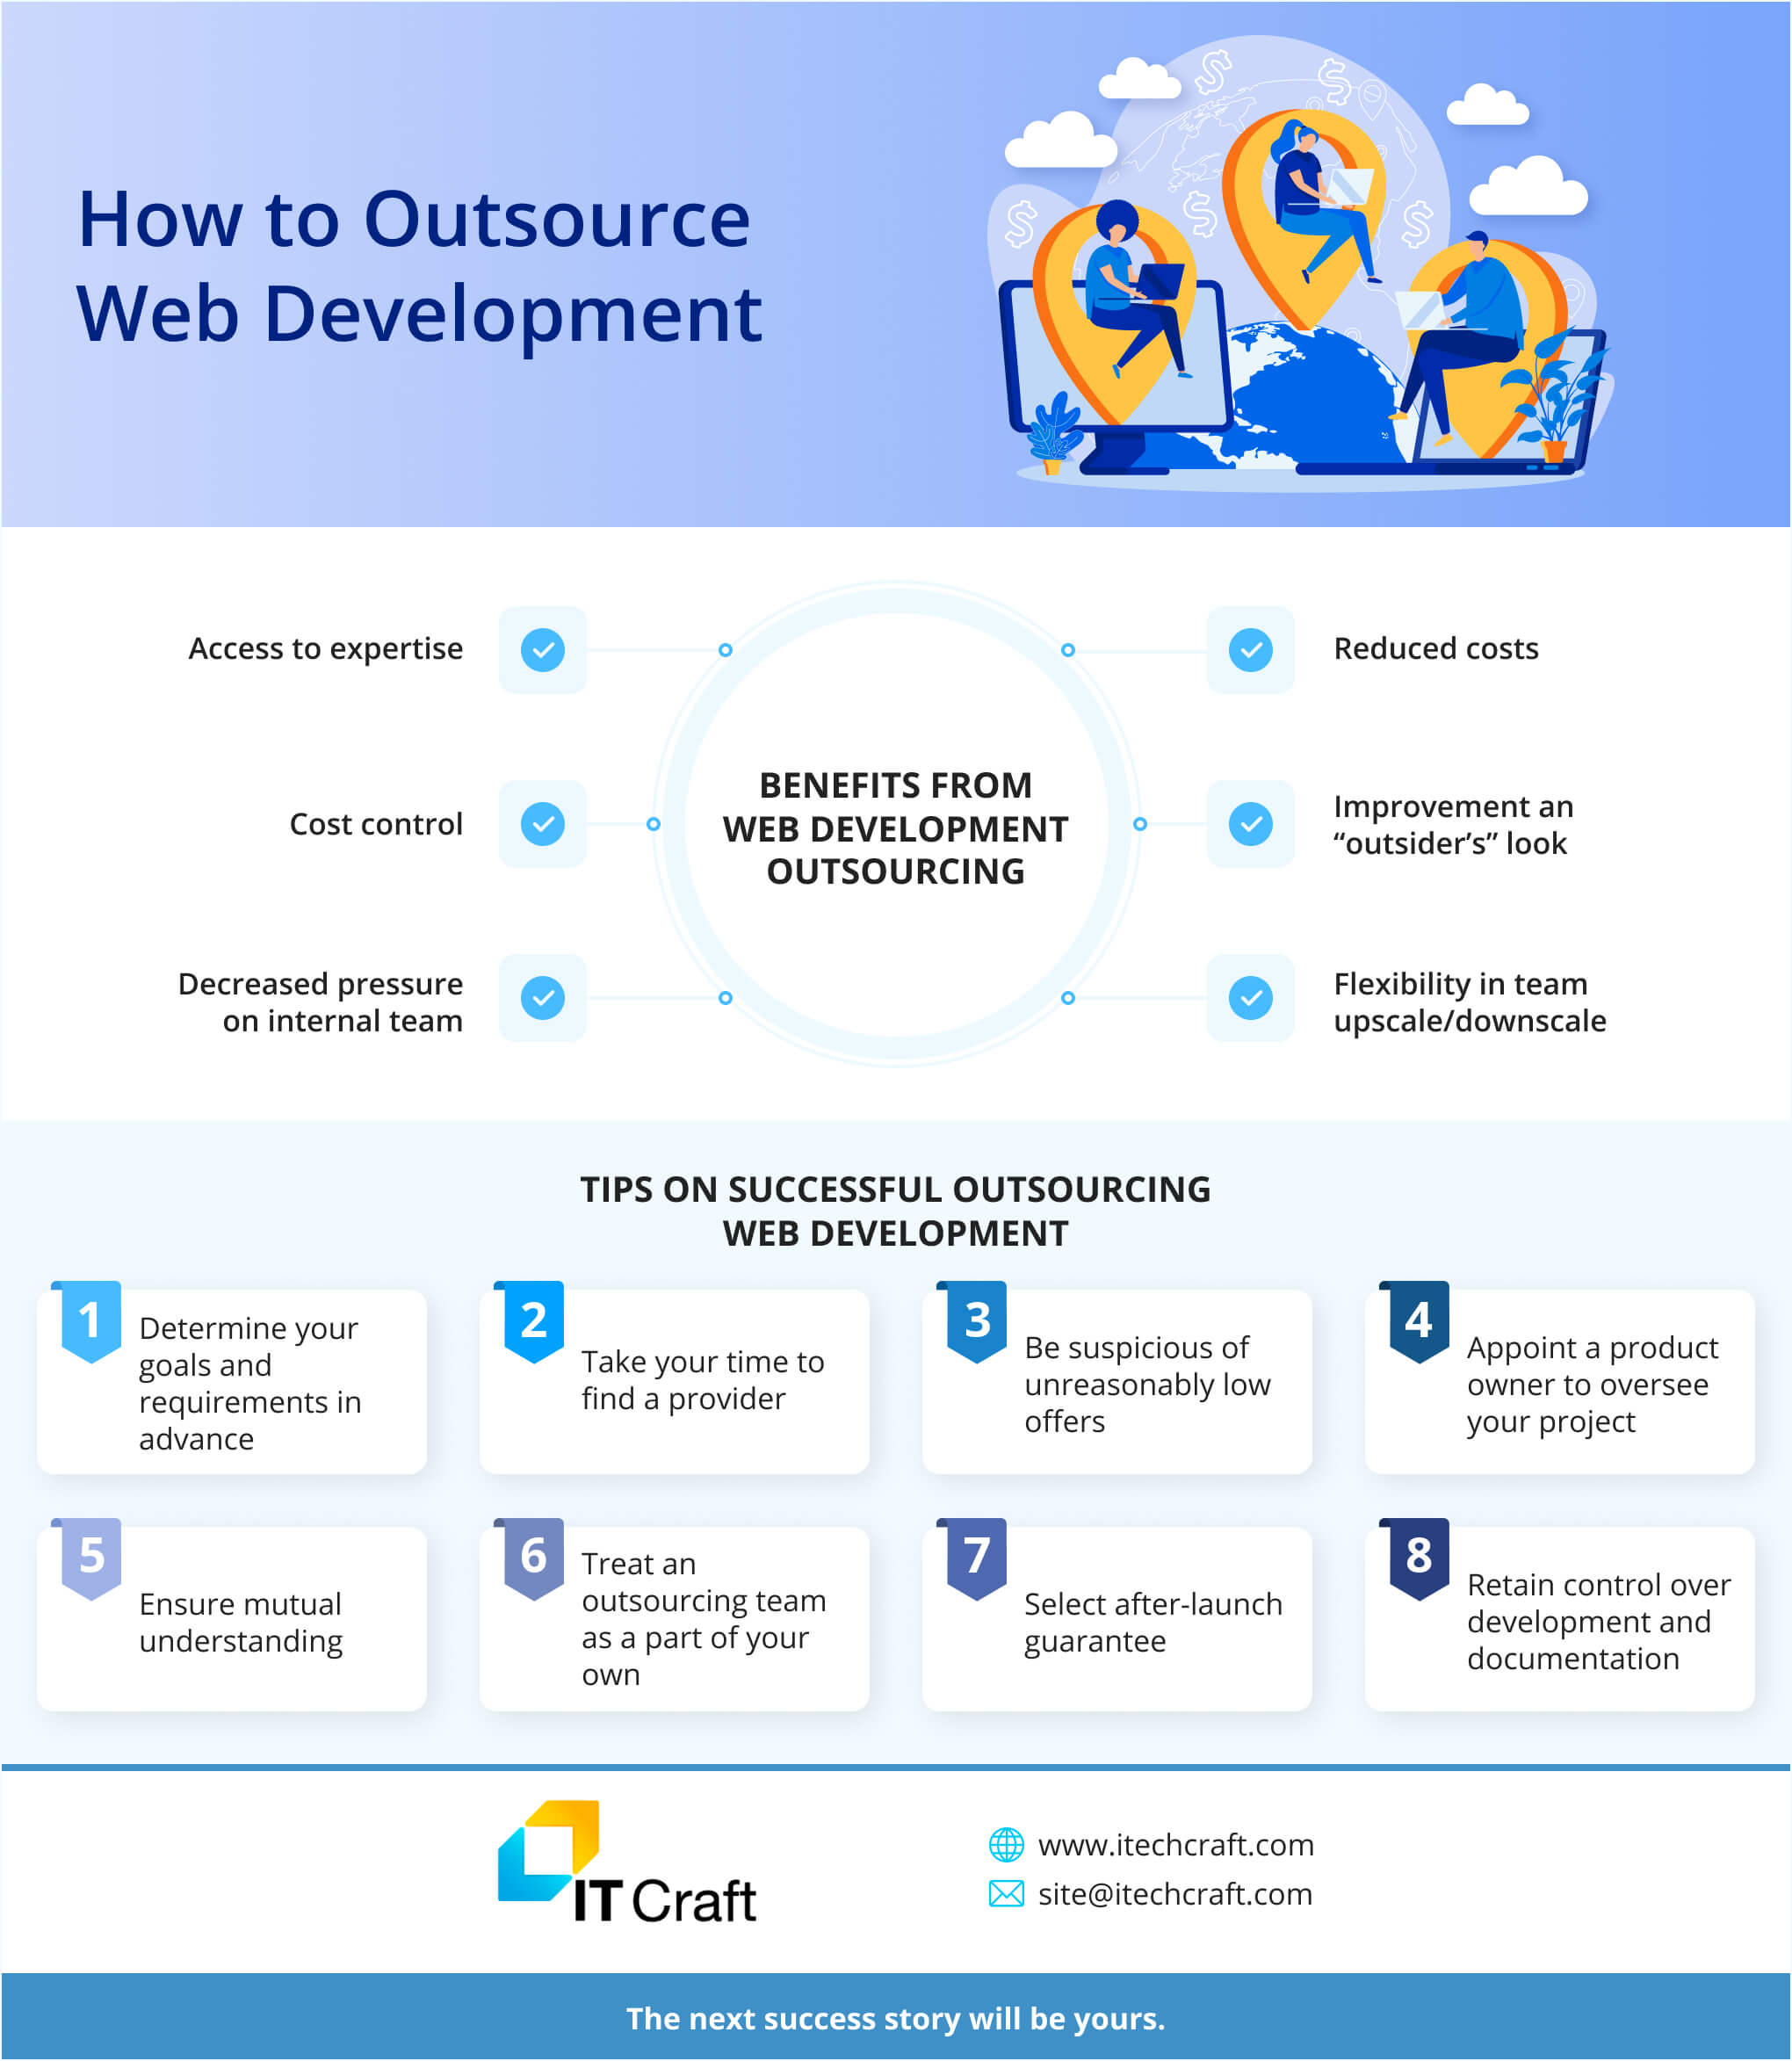 How to Outsource Web Development